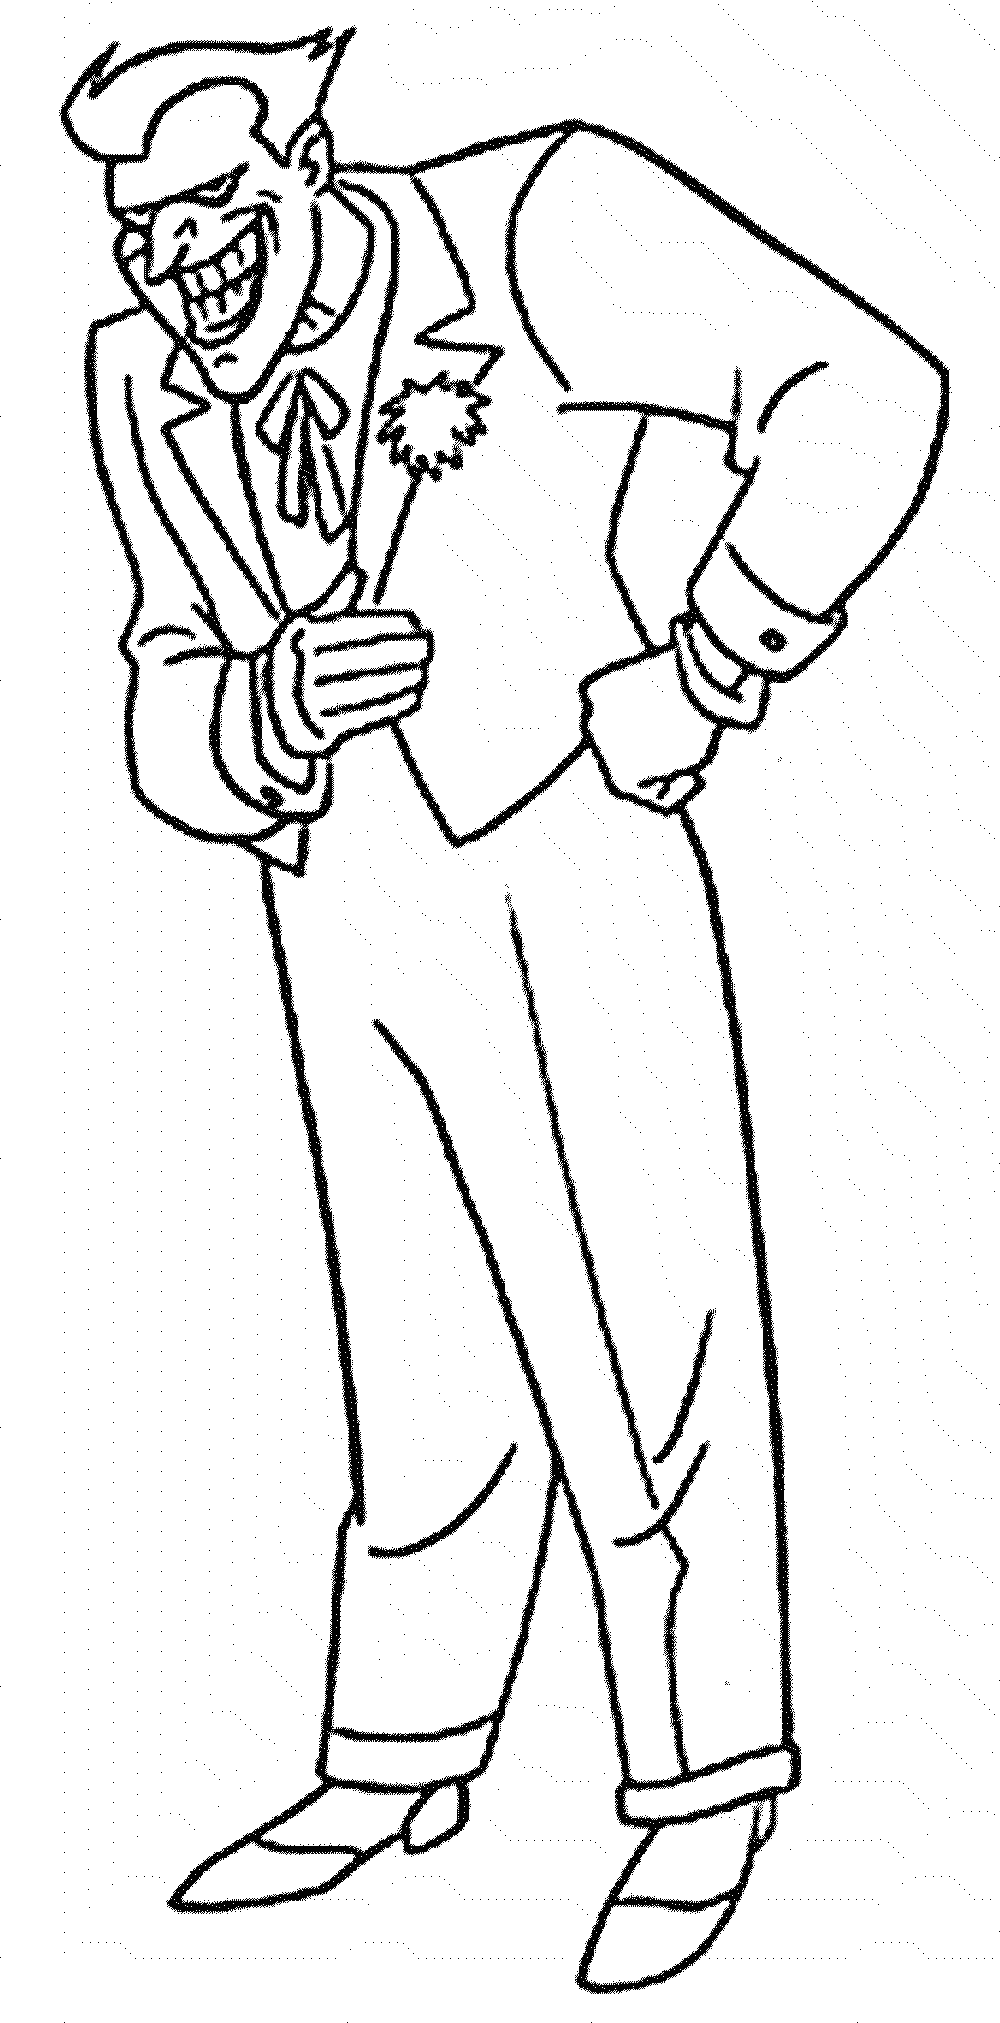 Amazing Joker Coloring Pages Mask To Print Suicide - Coloring Sheet Joker Printables (1000x2023)